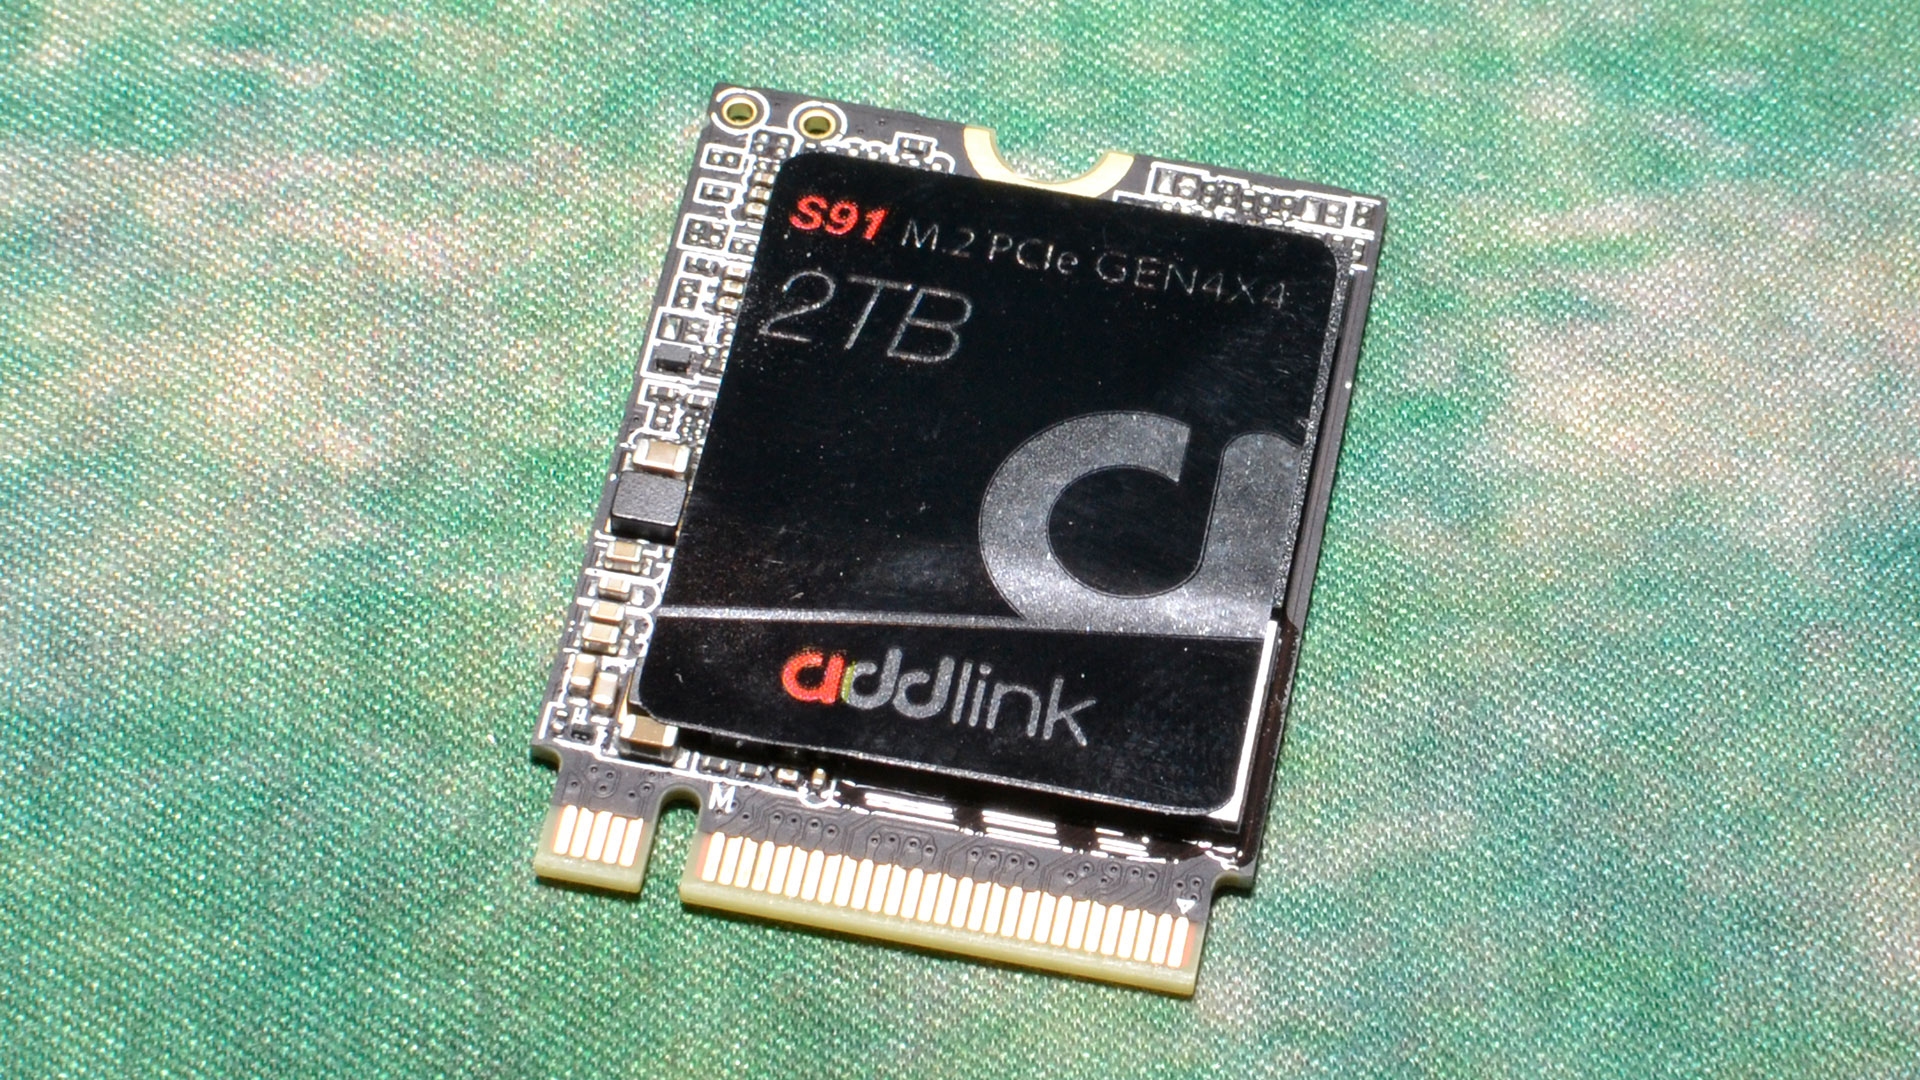 Addlink S91 2TB SSD Review: Another Capacious M.2 2230 SSD | Tom's